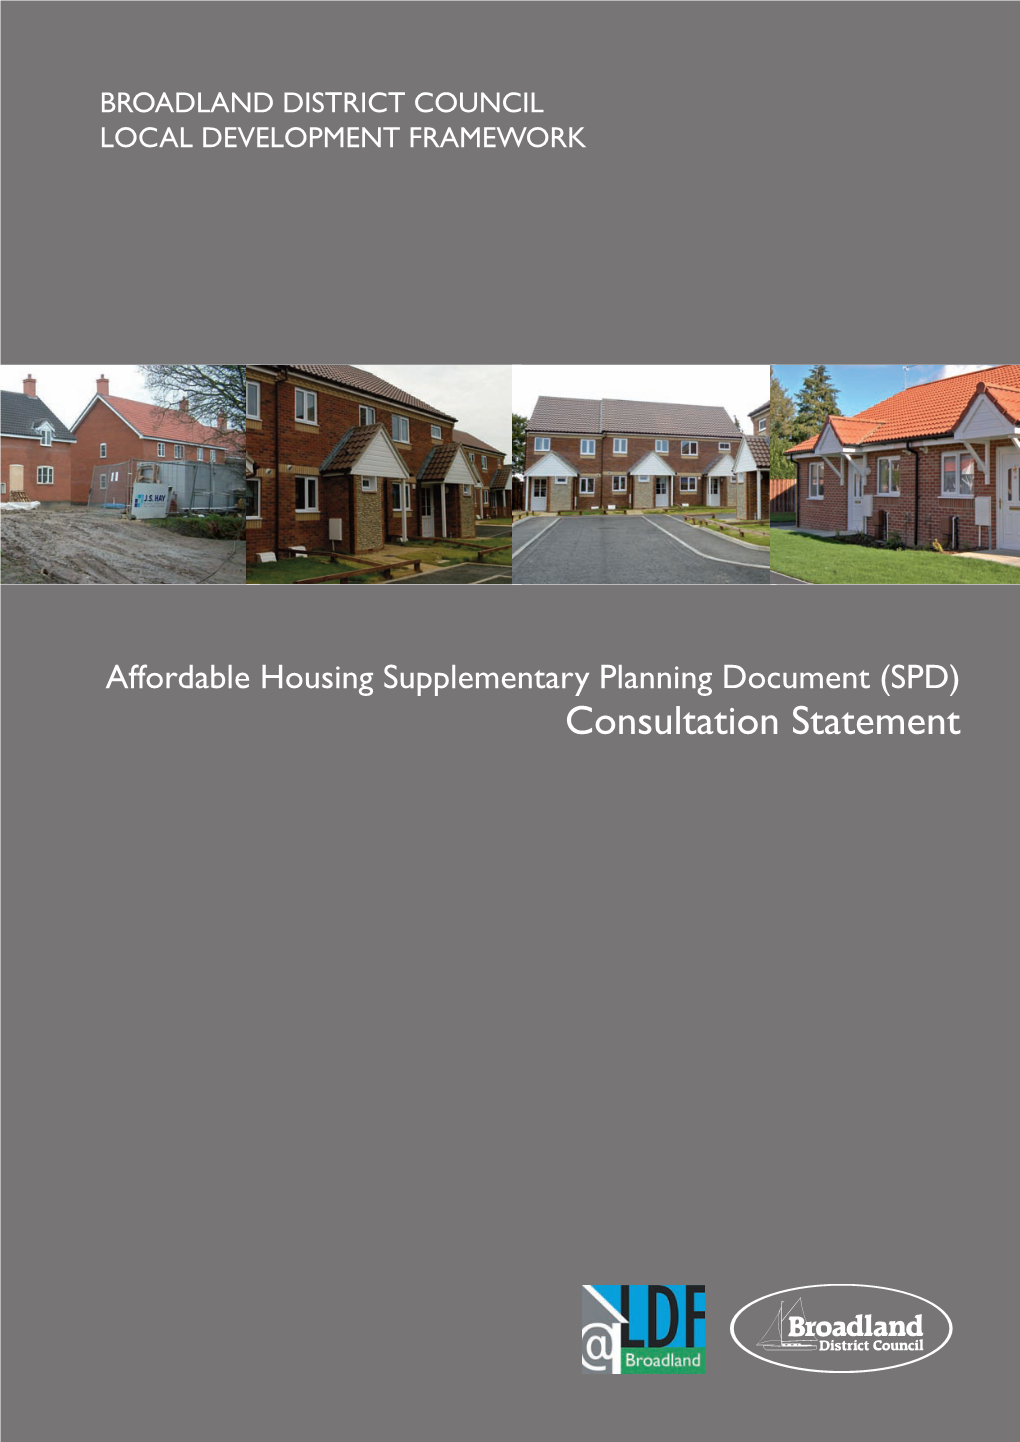 Consultation Statement for Affordable Housing